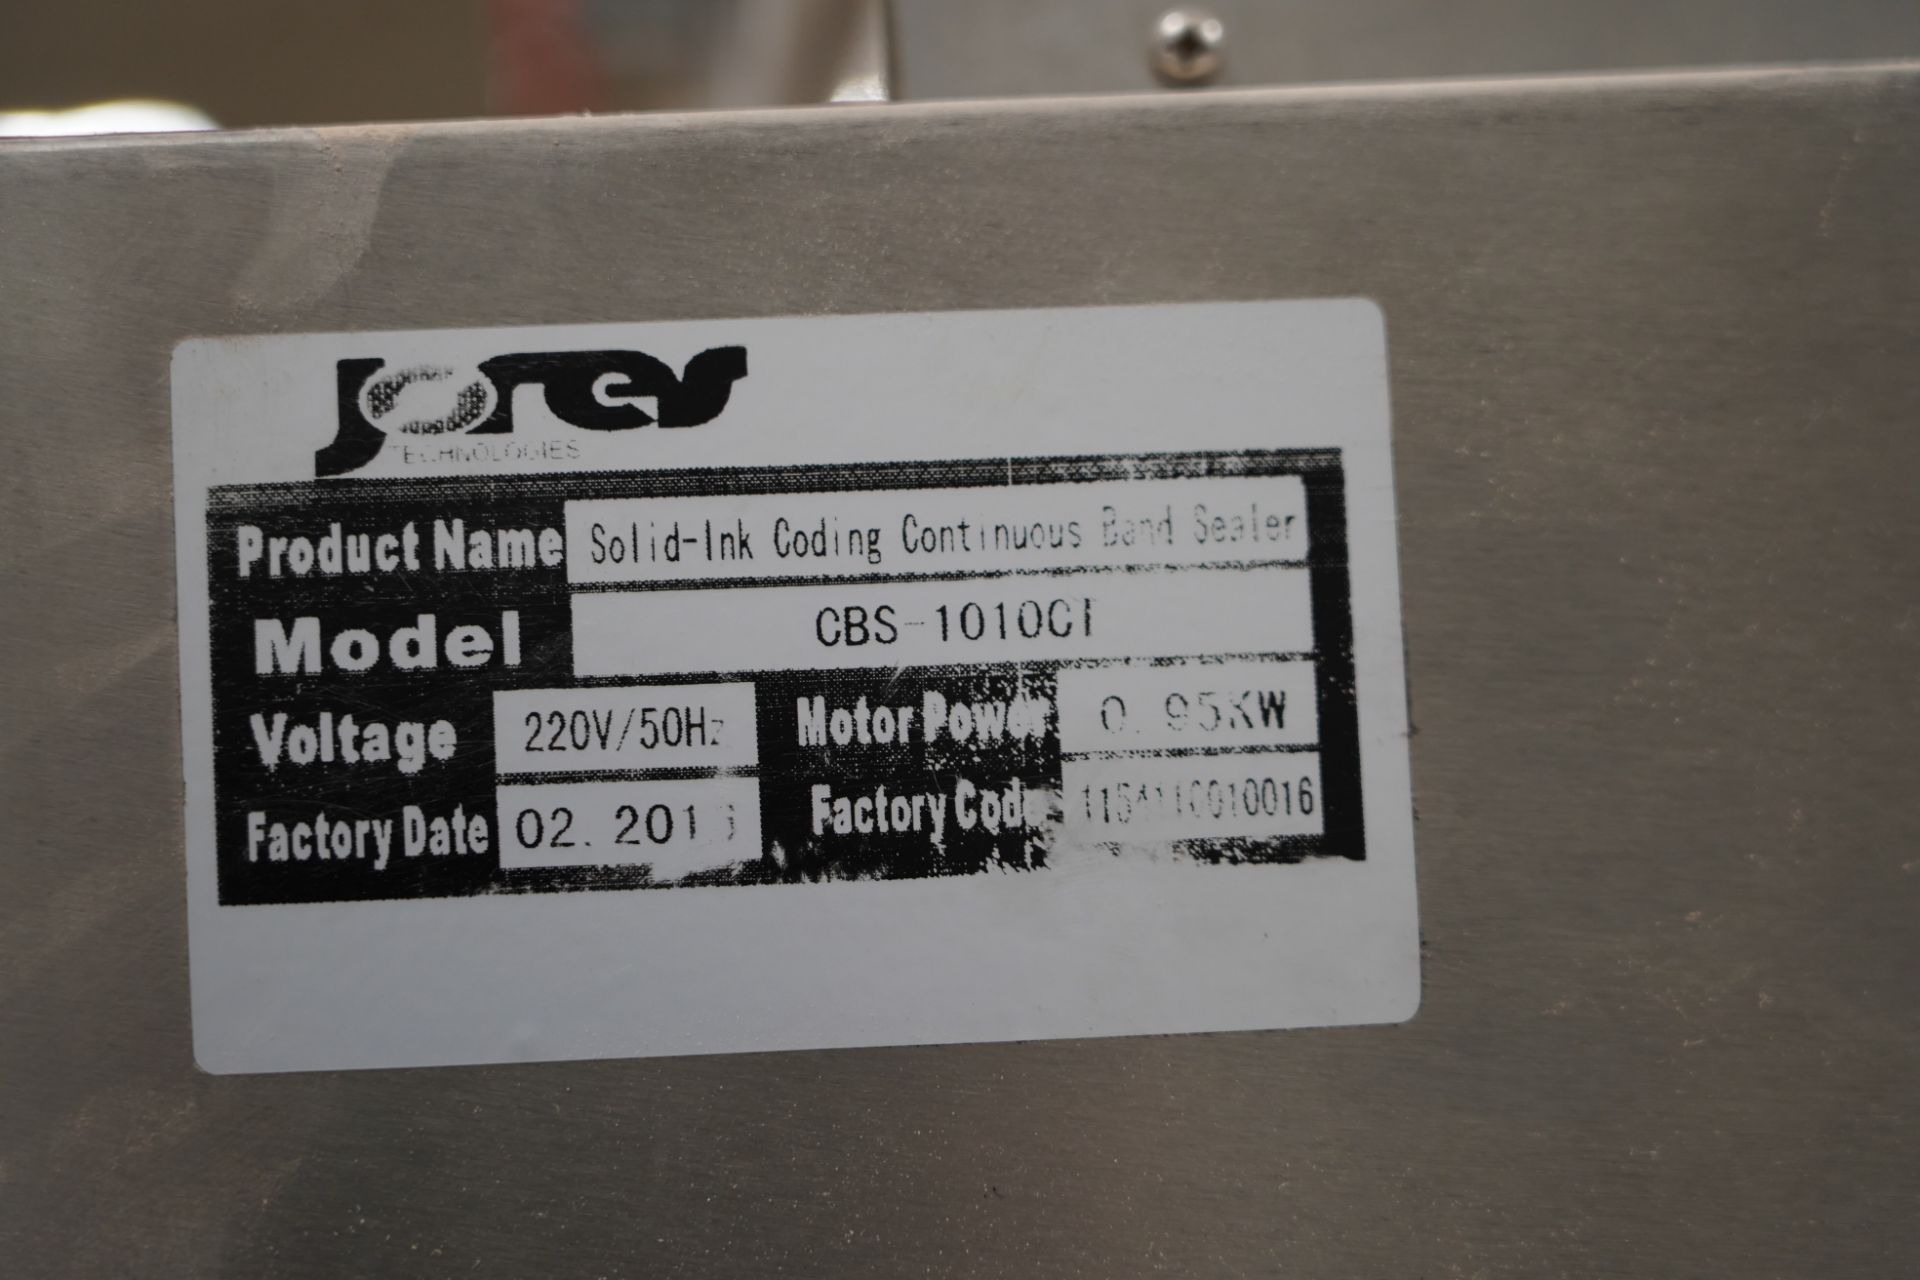 Jones Technologies Solid-Ink Coding Continuous Band Sealer - Image 5 of 5